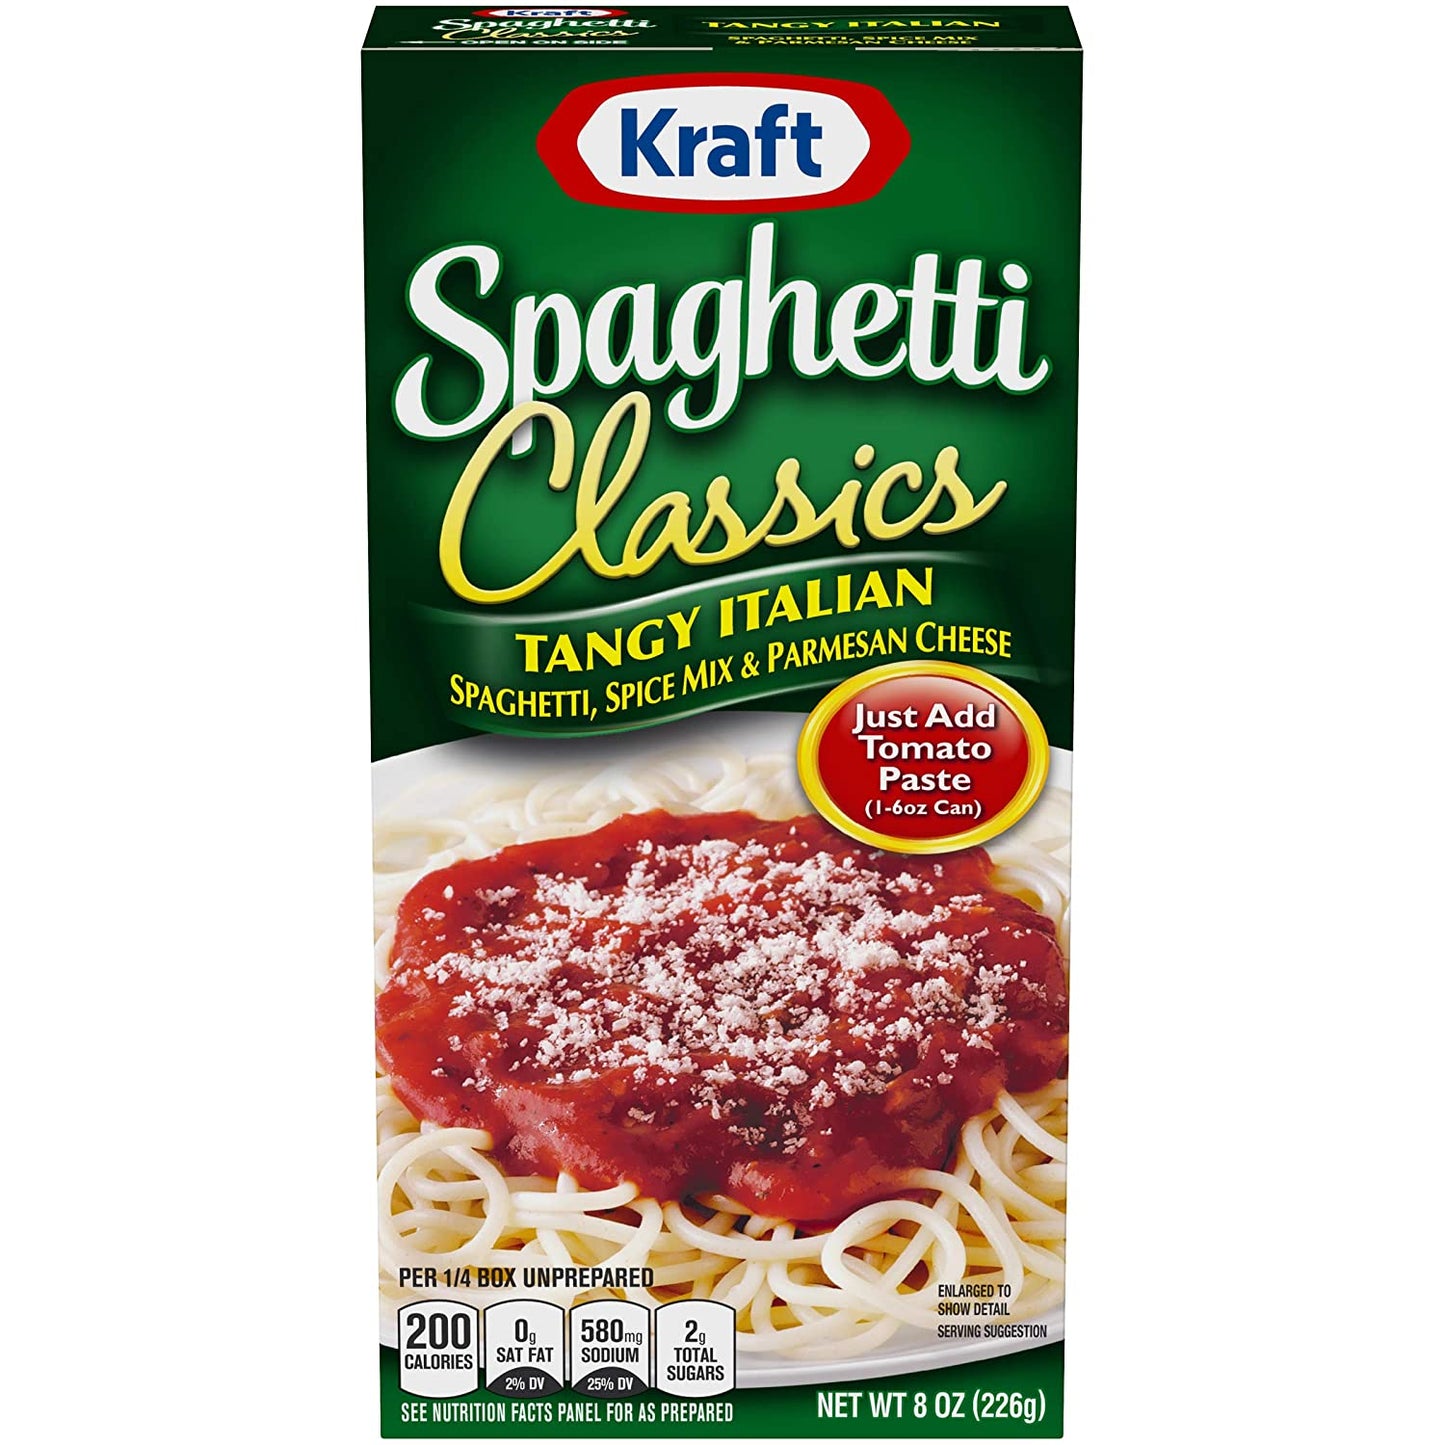 Kraft Spaghetti Classics Tangy Italian Spaghetti (Spices, & Parmesan Cheese Meal Mix, 12 ct Pack, 8 oz Boxes)